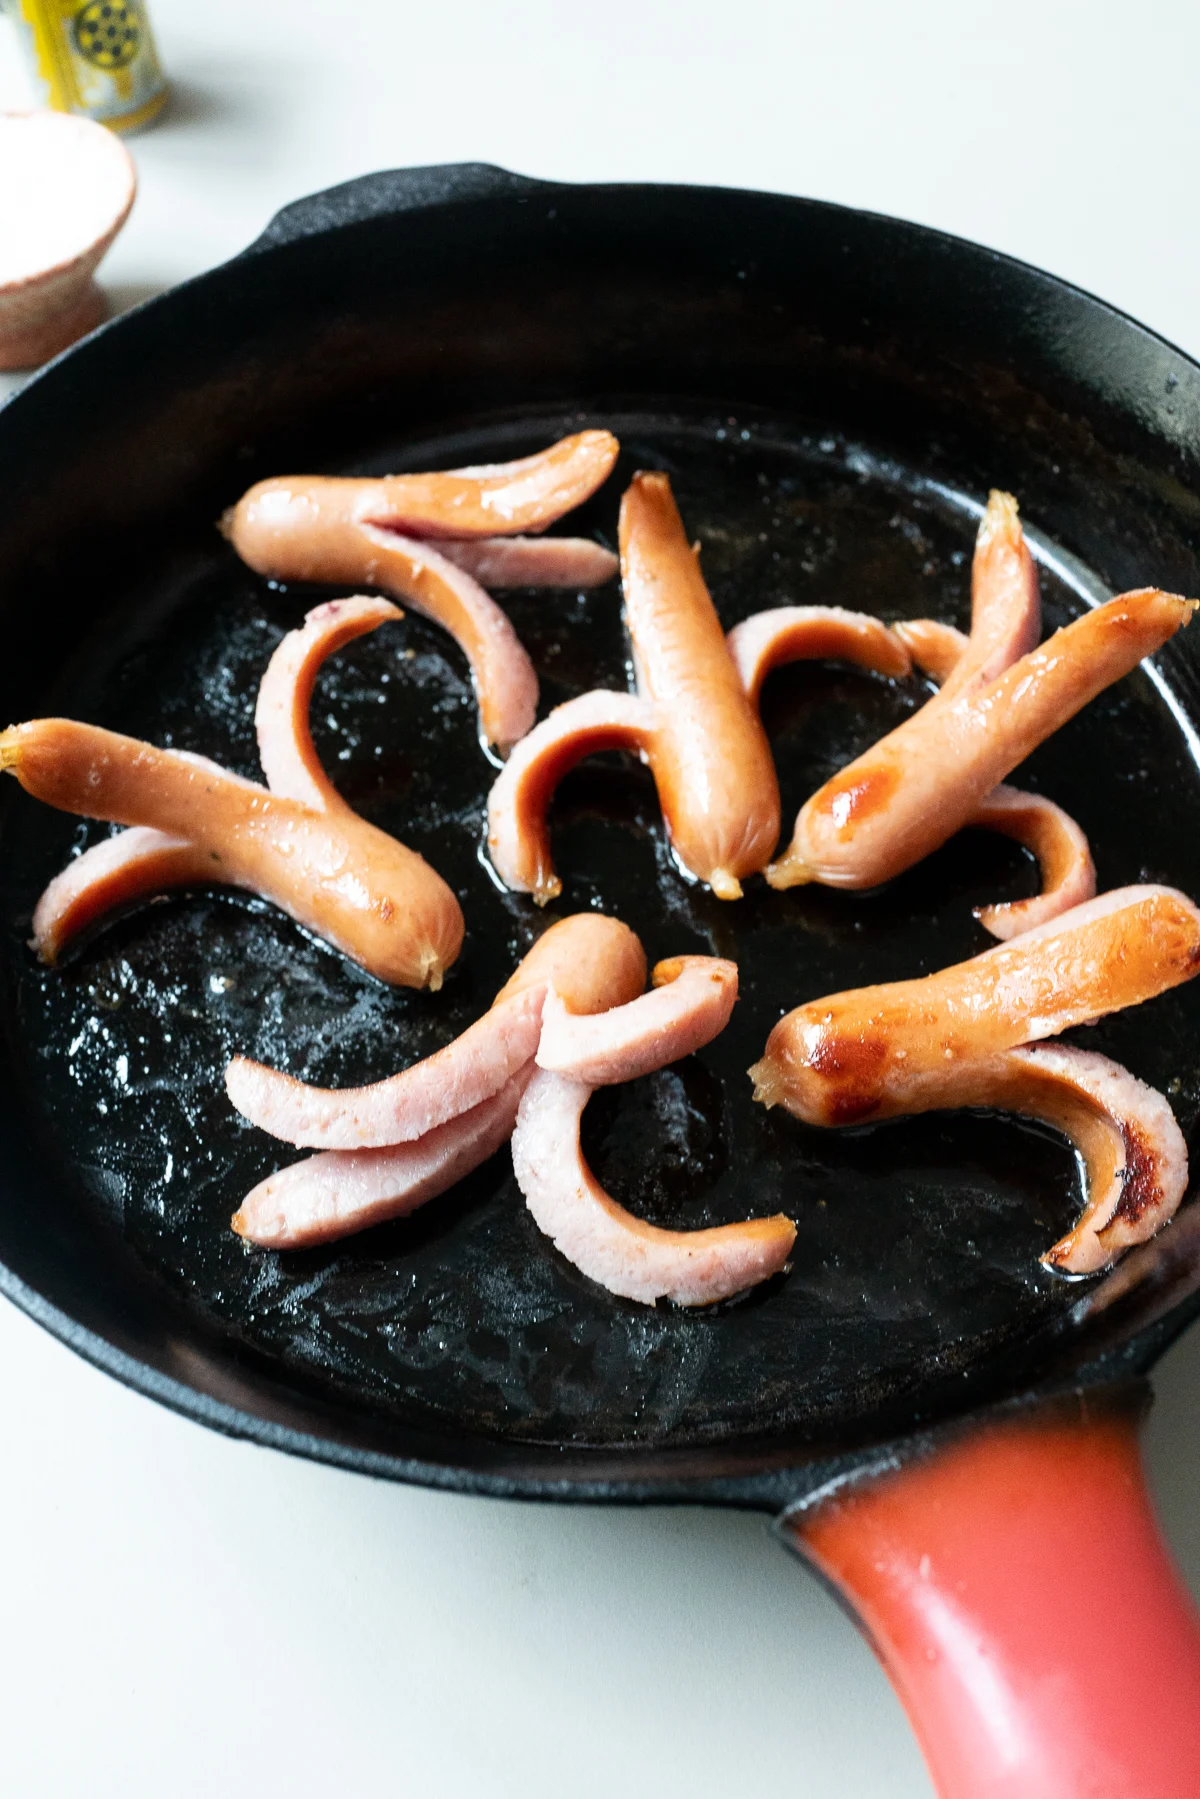 Six cooked Octopus Hot Dogs in a cast iron pan.